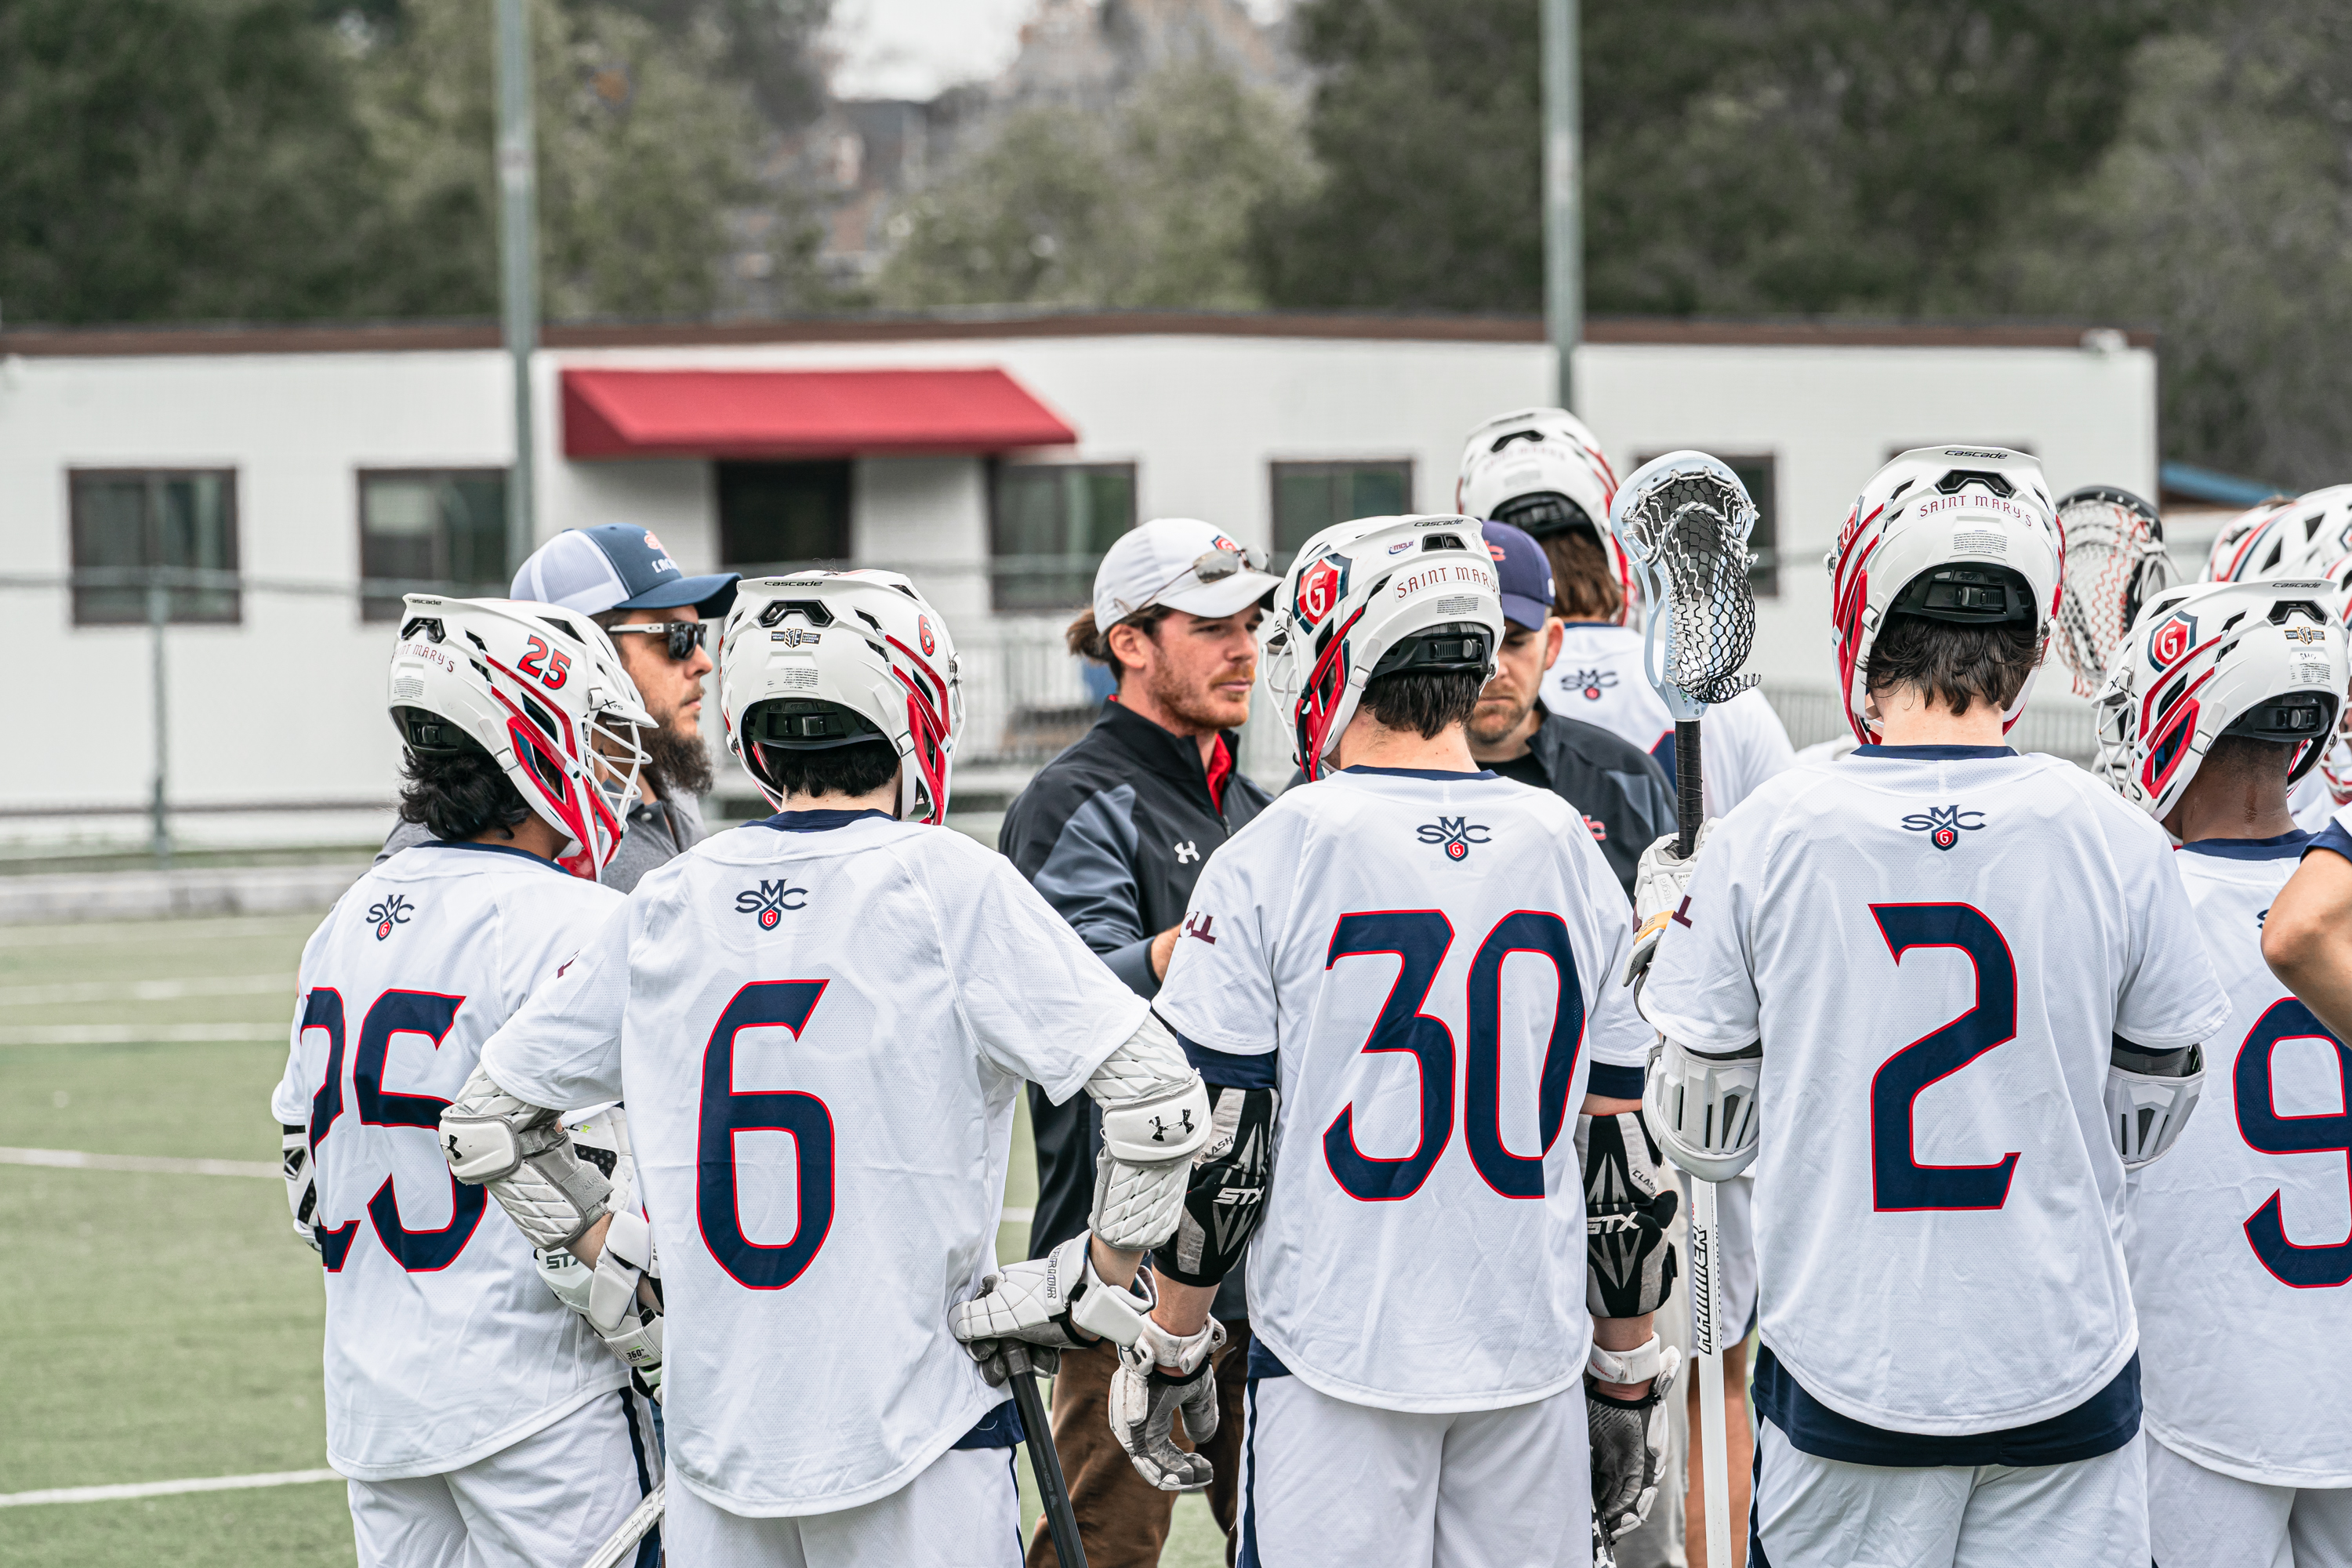 Men's Lacrosse Players huddles around for coach talk